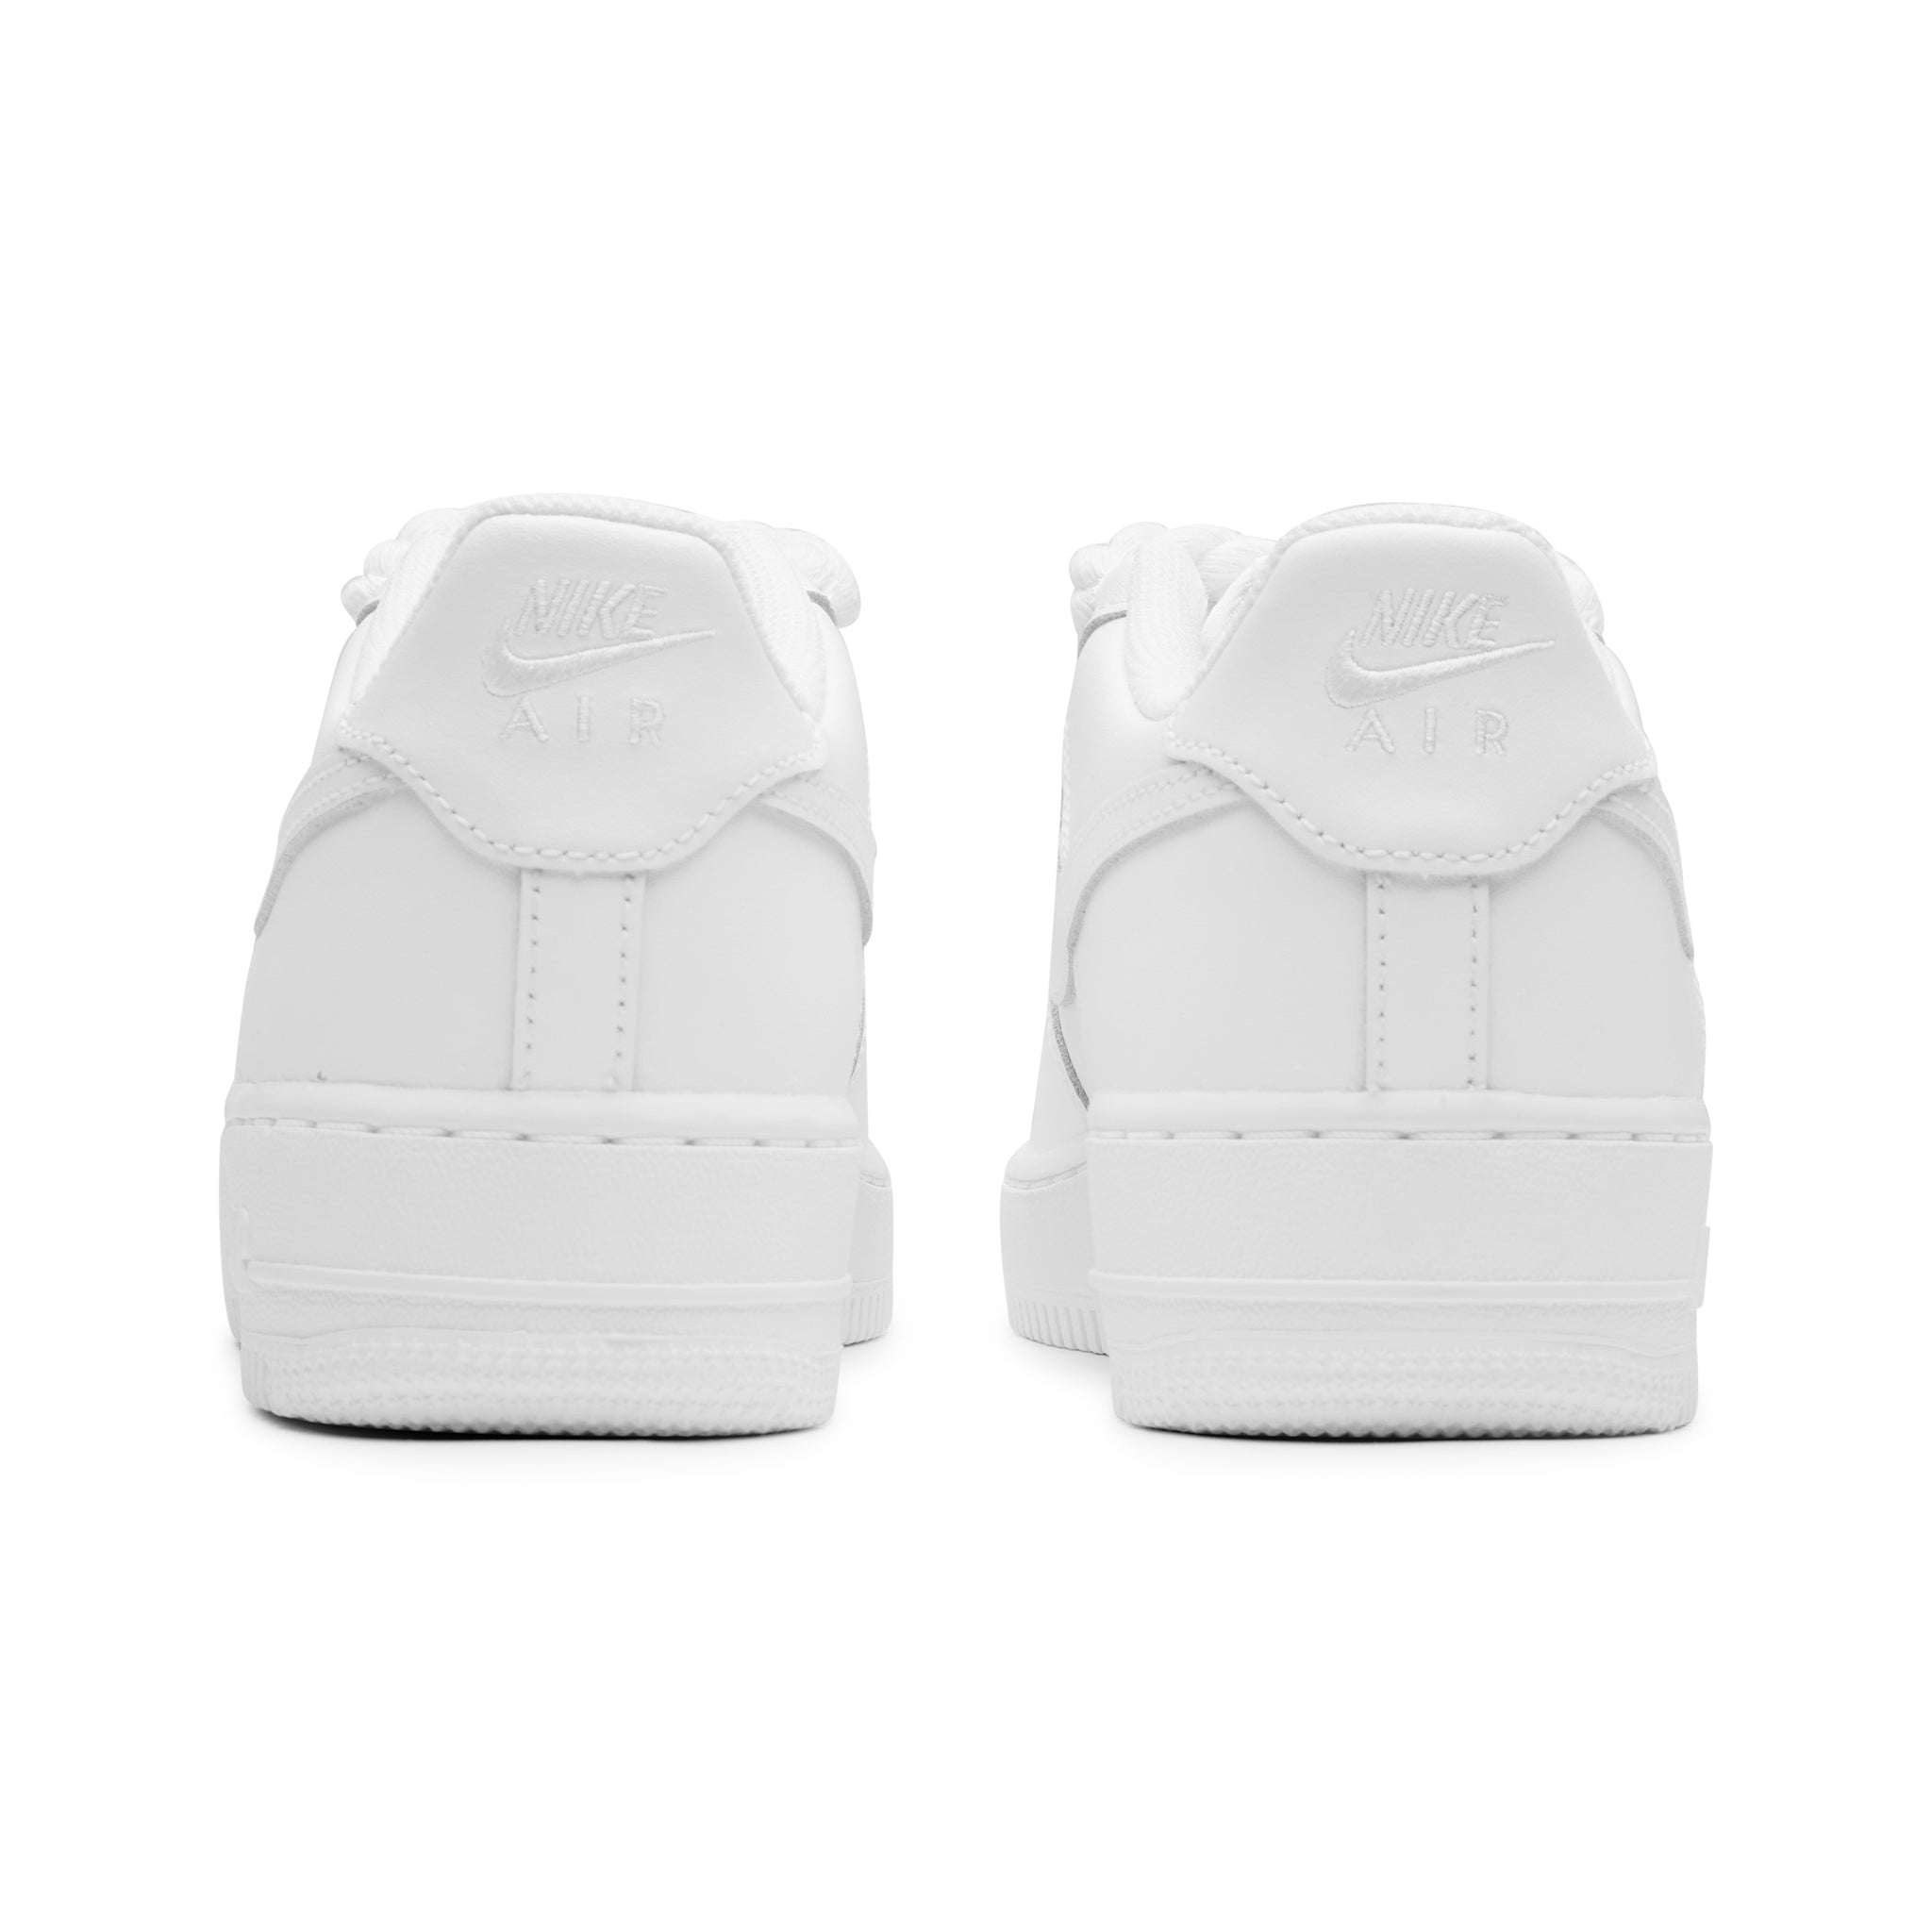 Nike Air Force 1 Low Rope Lace White (GS)